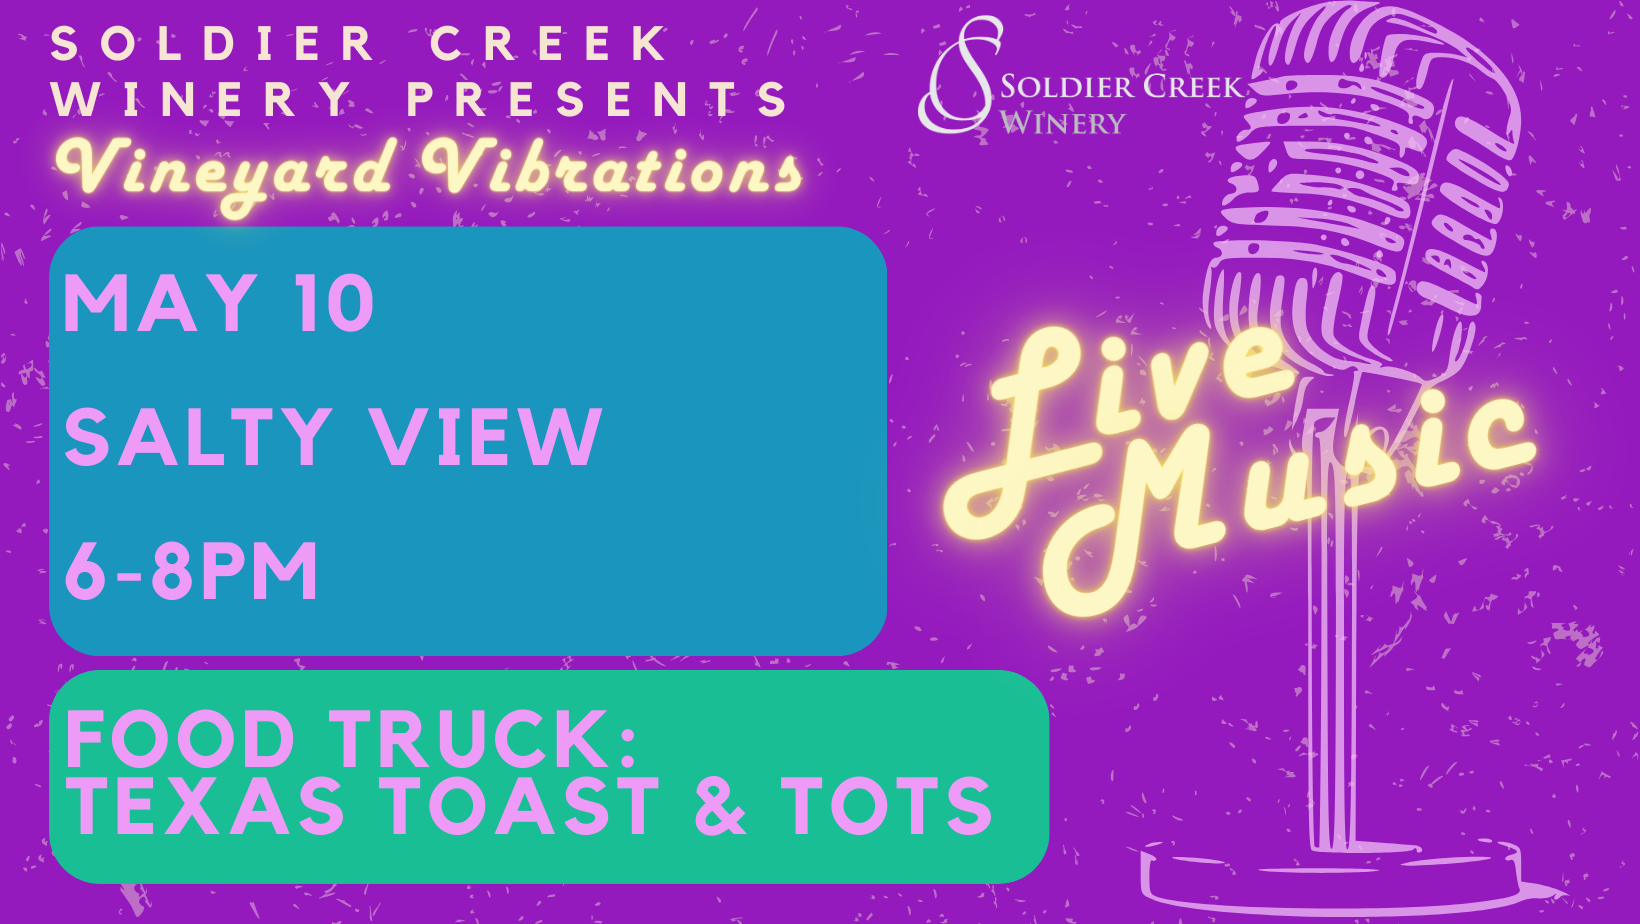 free live music every friday at solider creek winery. friday may 10 is salty view from 6-8pm. food truck is texas toast & tots